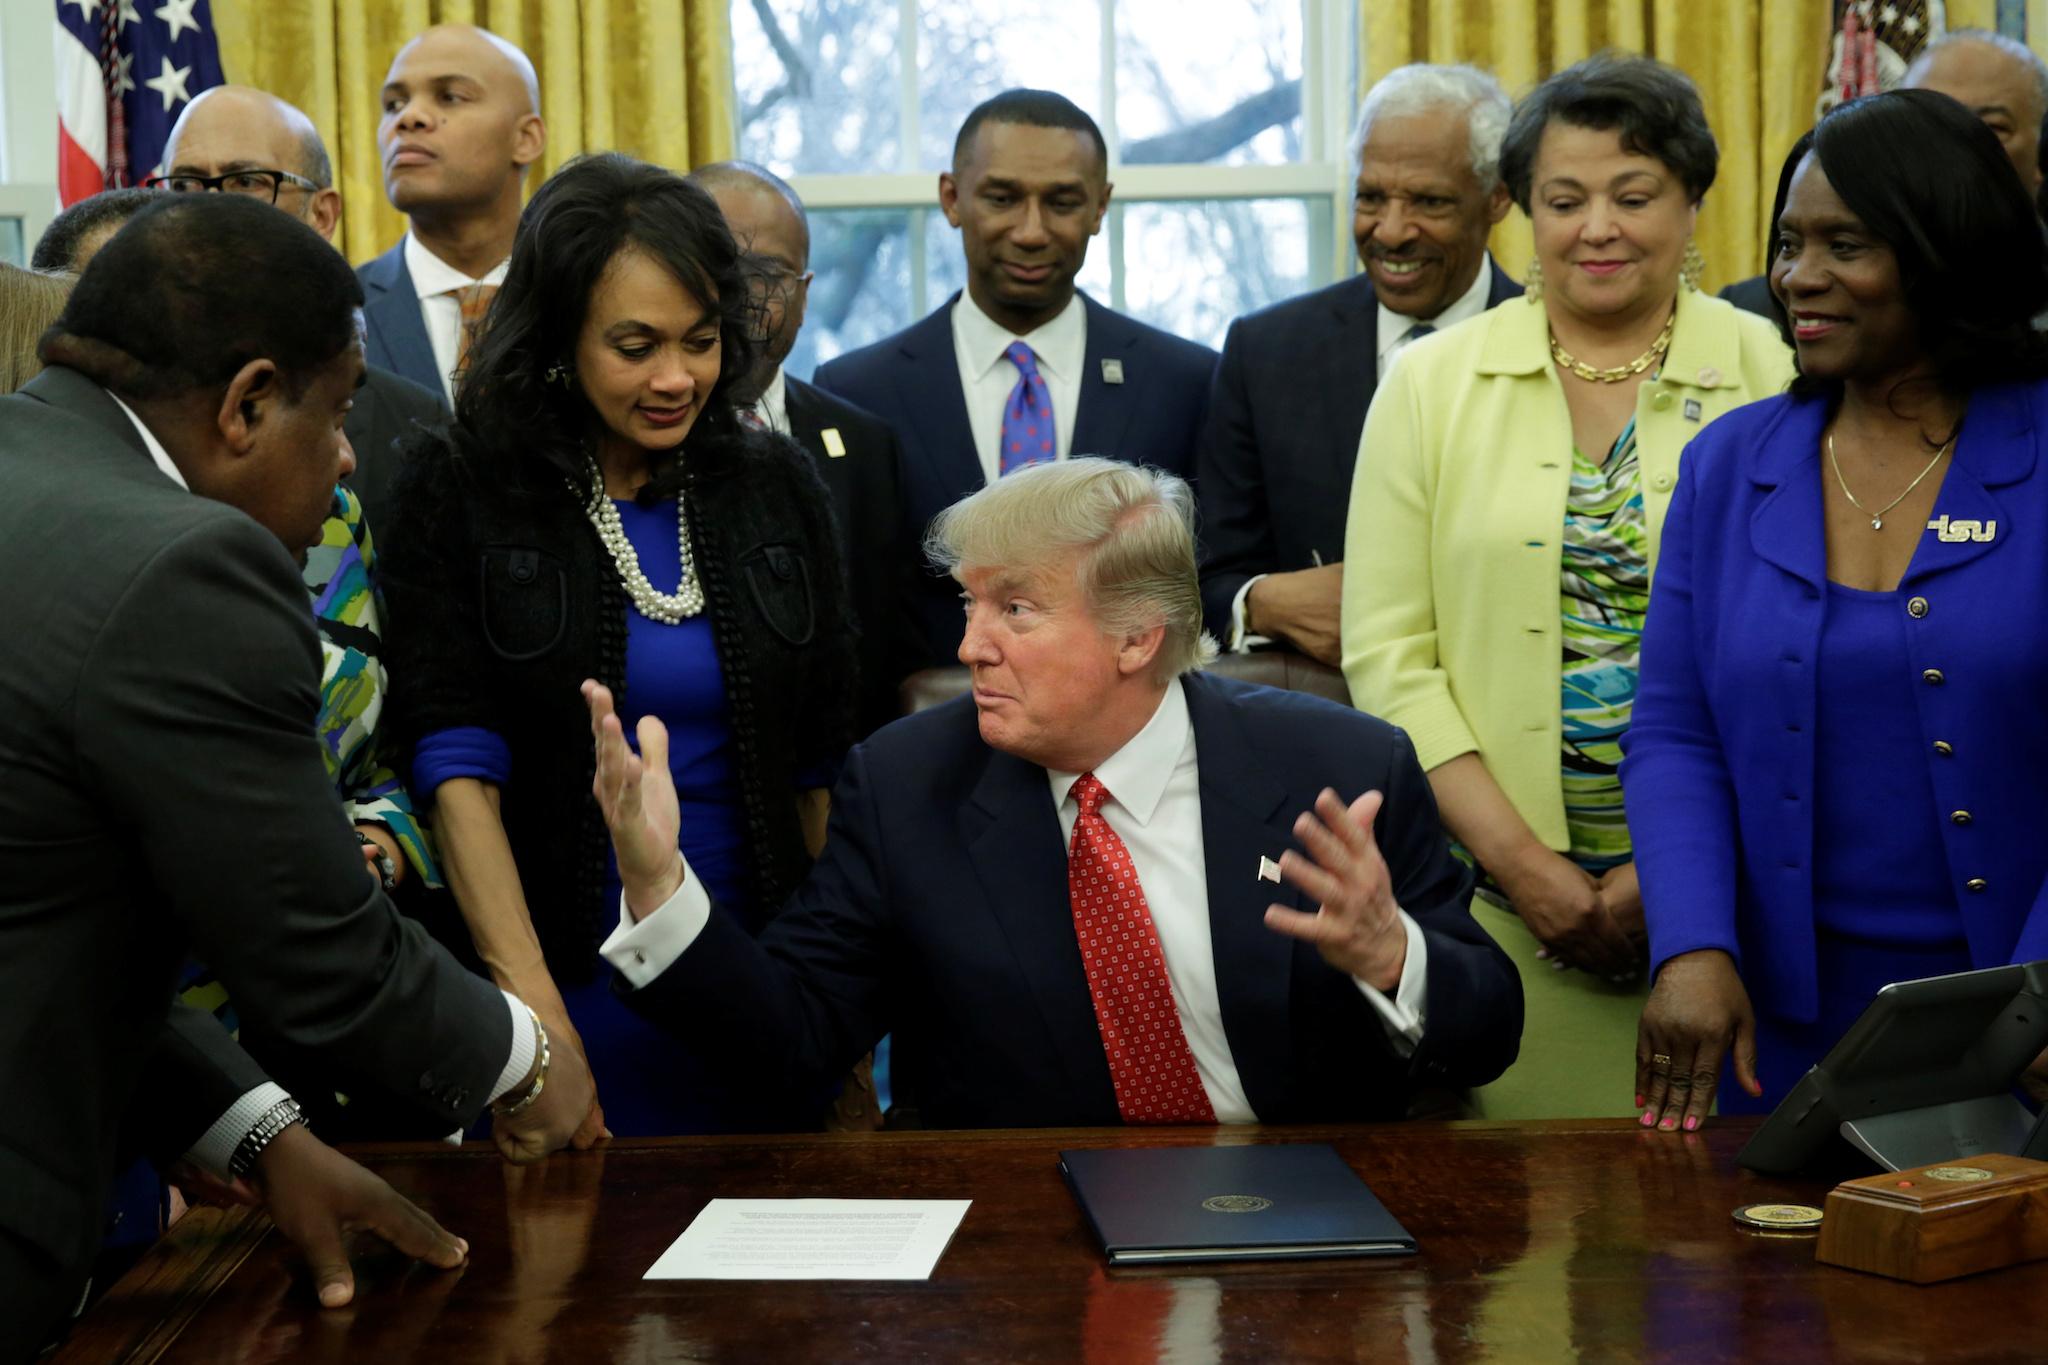 President Donald Trump talks to guests after signing the HBCU executive order in the Oval Office of the White House, in Washington, DC, U.S. February 28, 2017